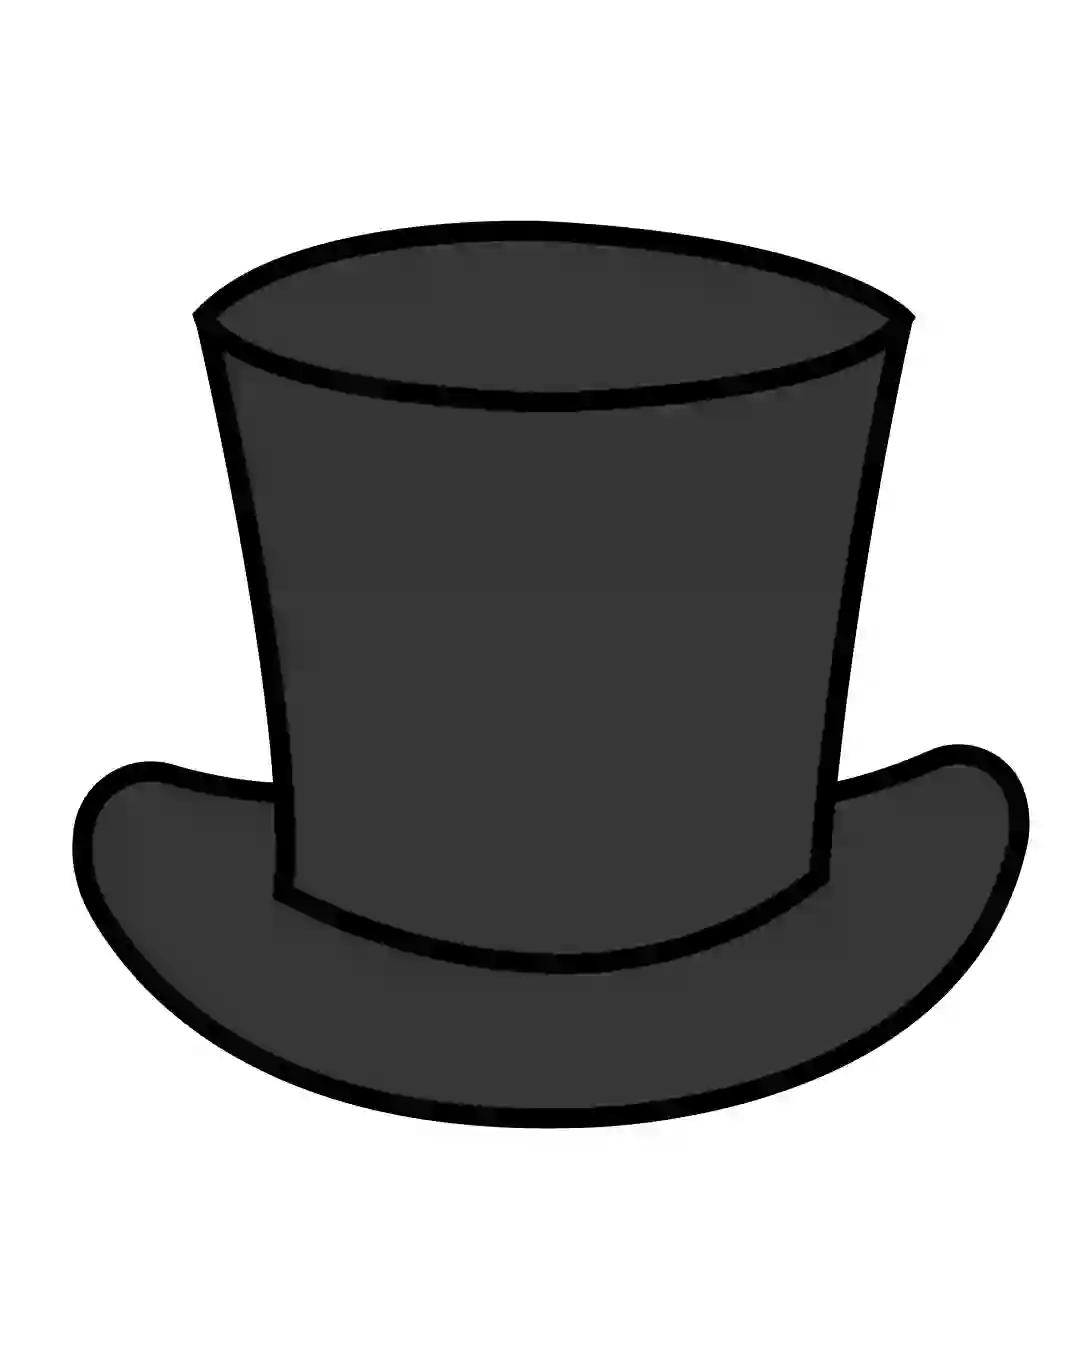 How To Draw Top Hat In Simple And Easy Steps